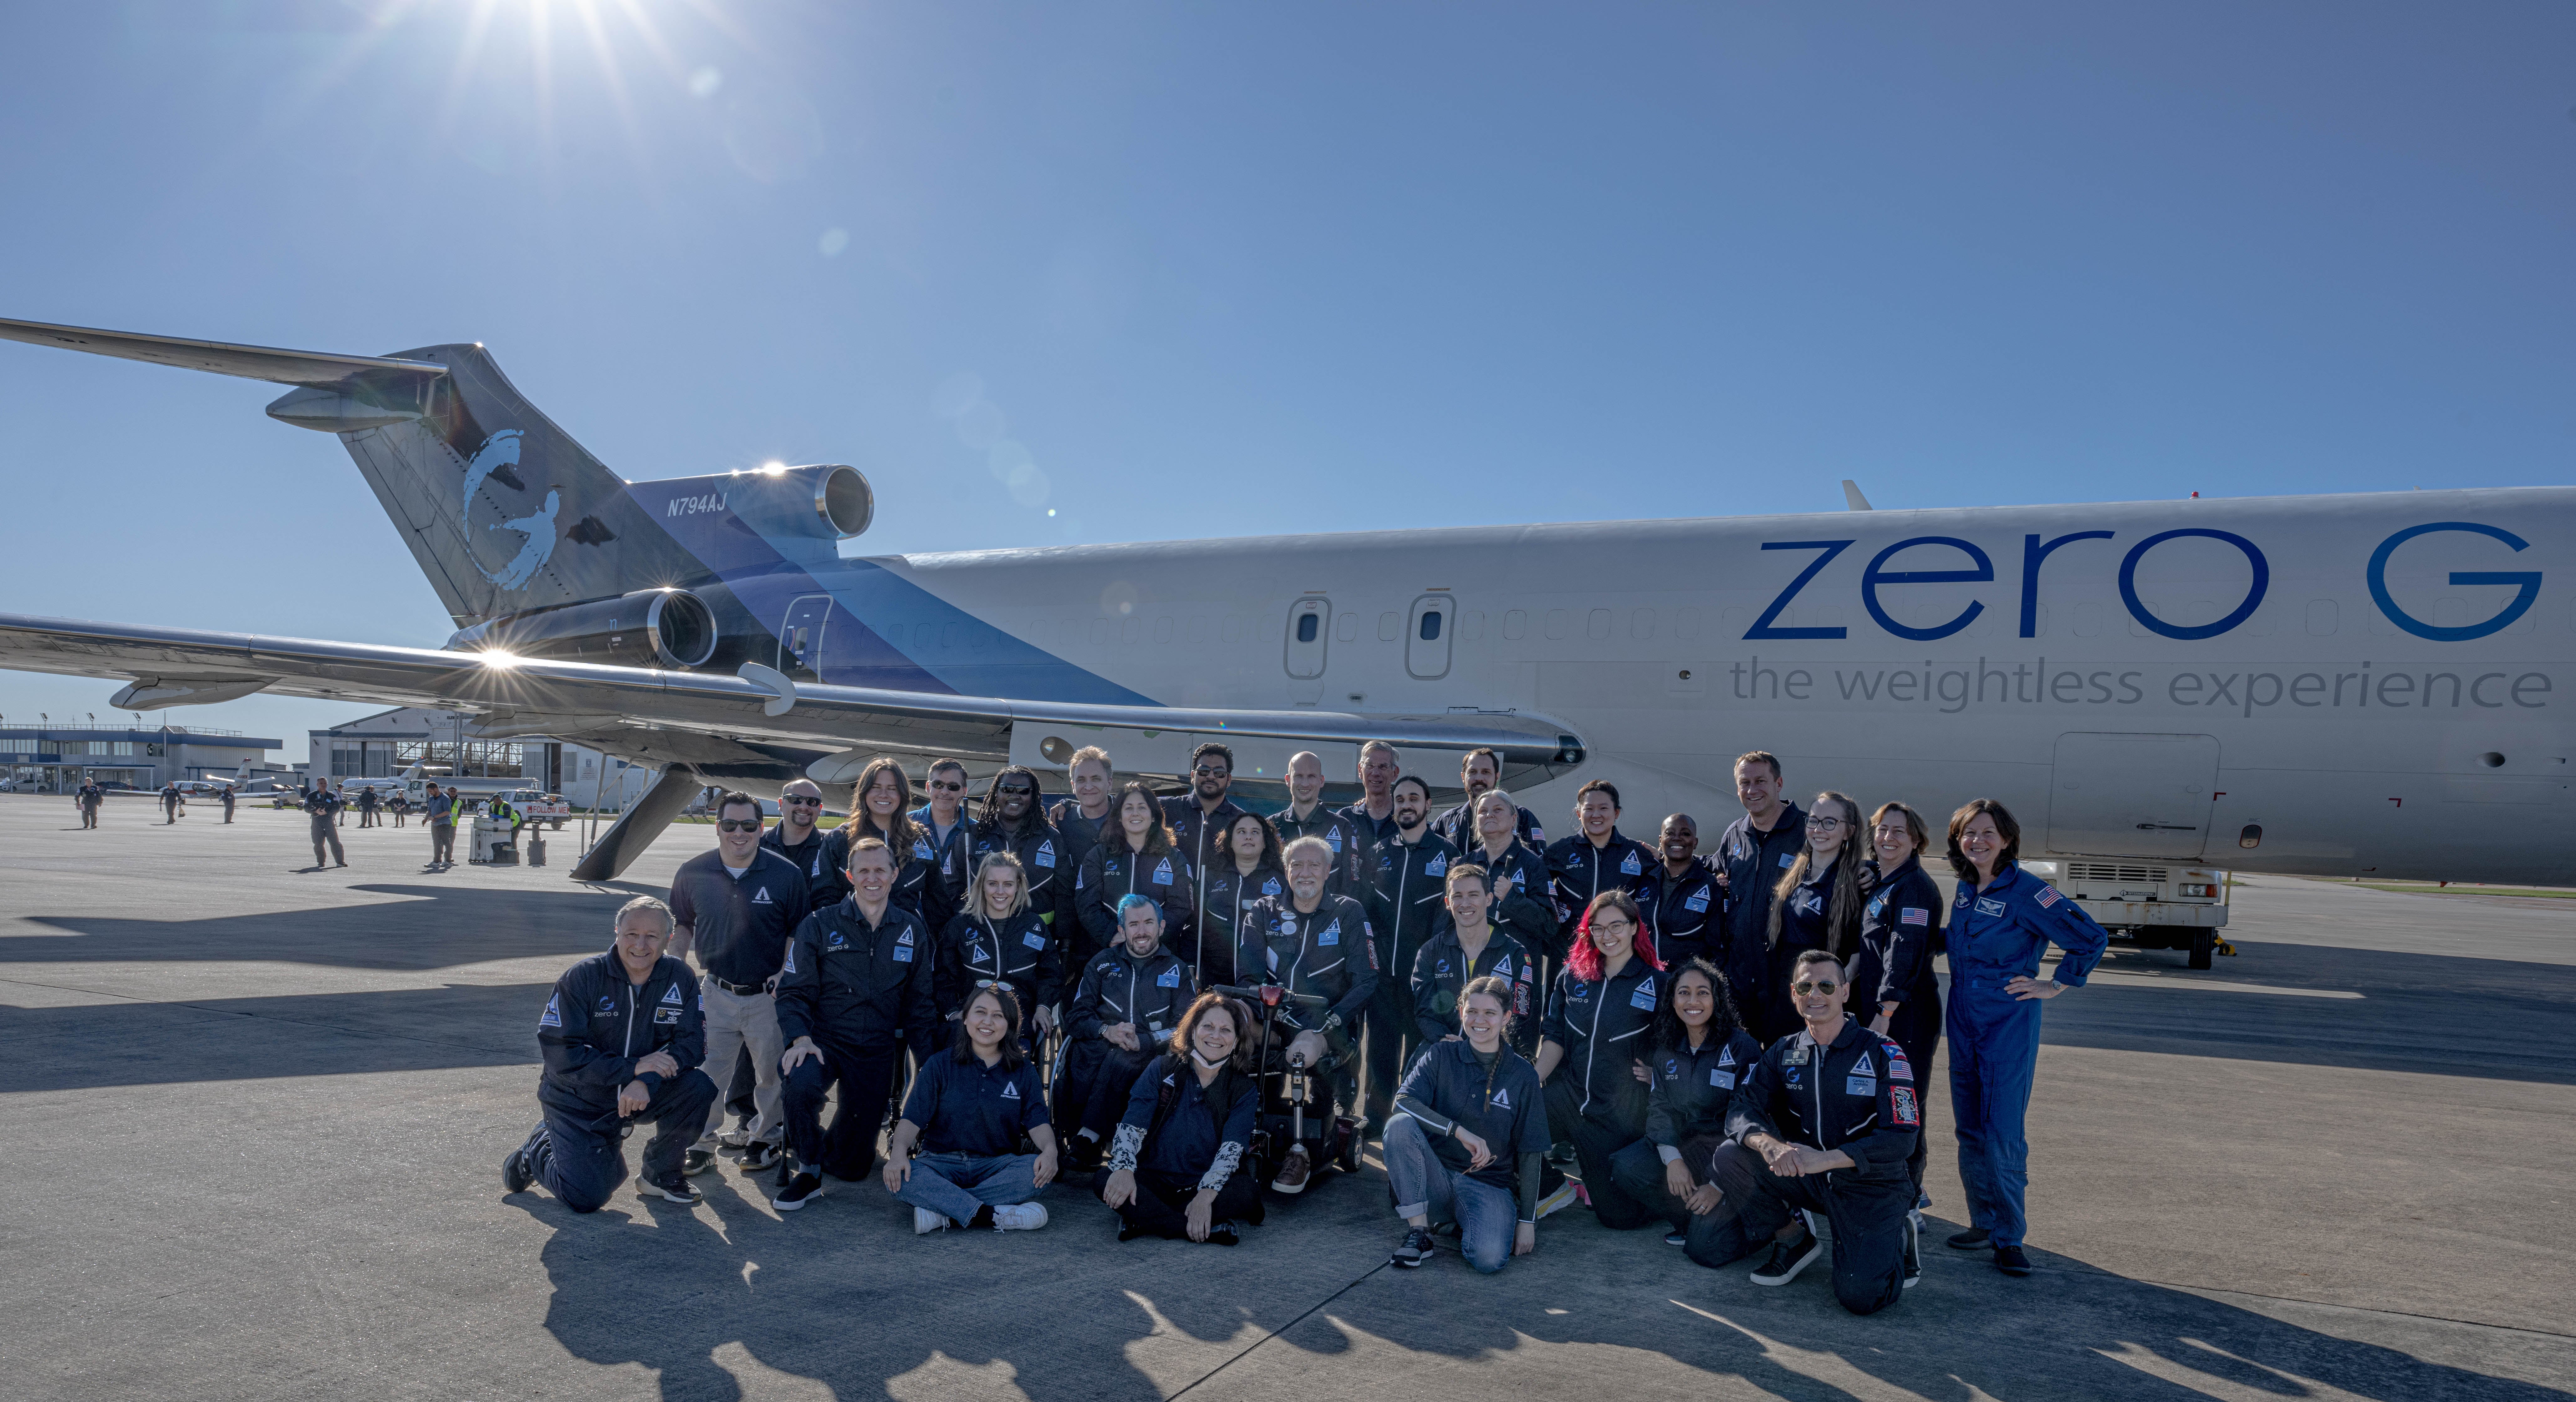 Crew members of the AstroAccess disabled research flight conducted on December 15, 2022 at Ellington Field in Houston, Texas. (Photo: Tasha Dixon)